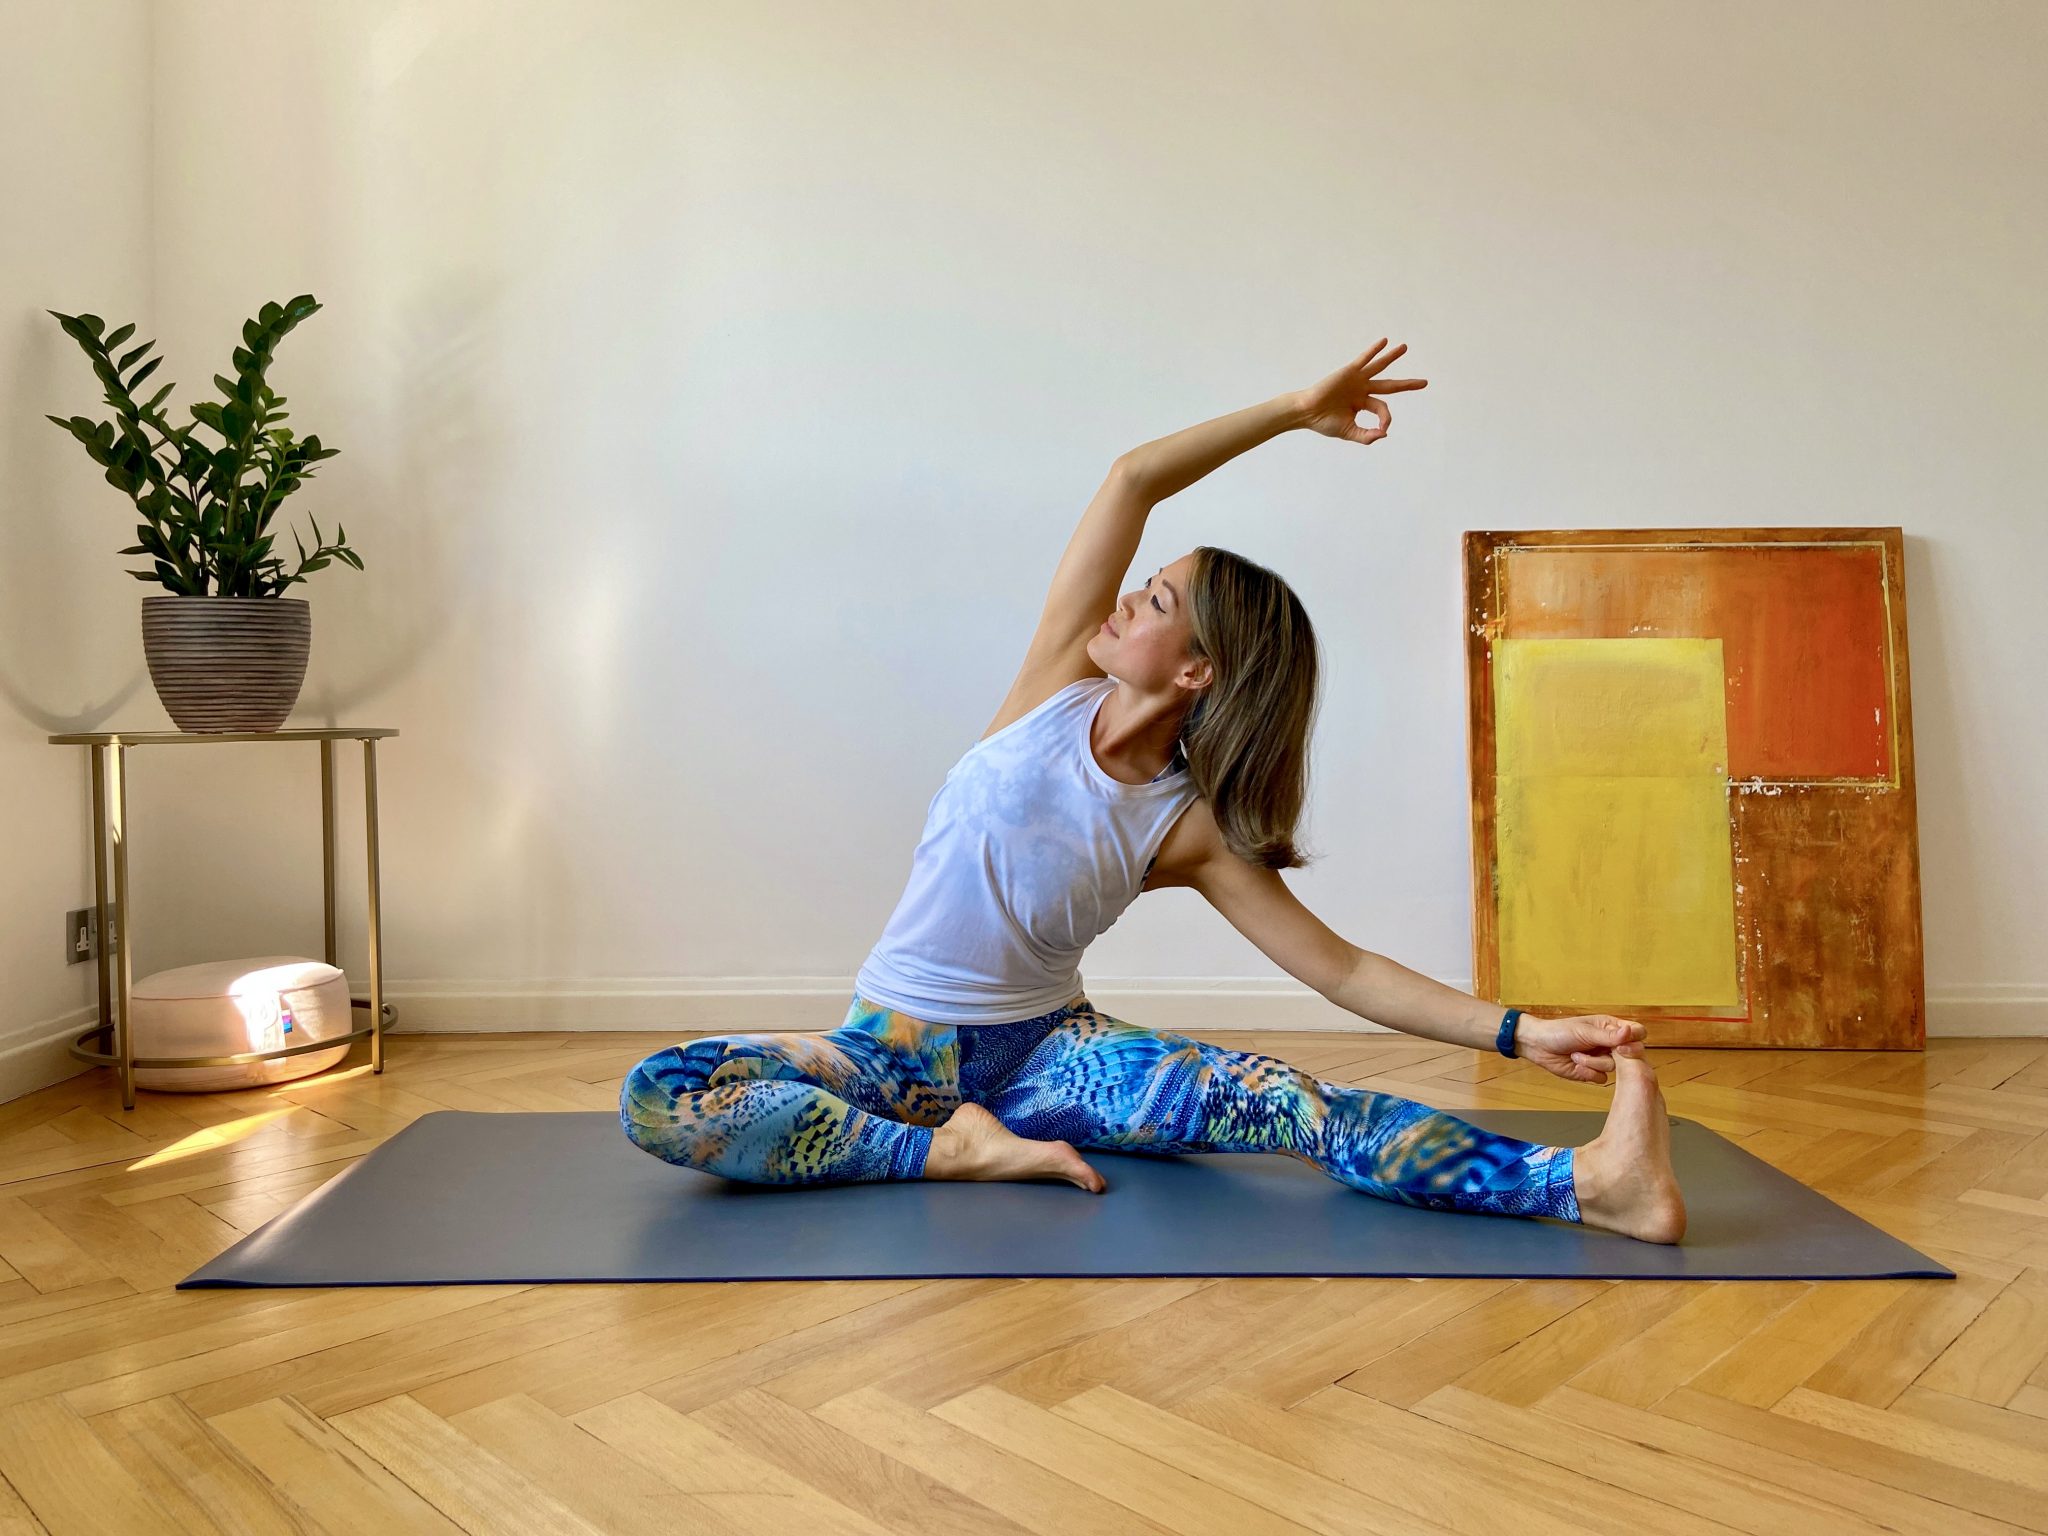 Yoga For Posture Alignment: 9 Poses to Save Your Spine - Welltech